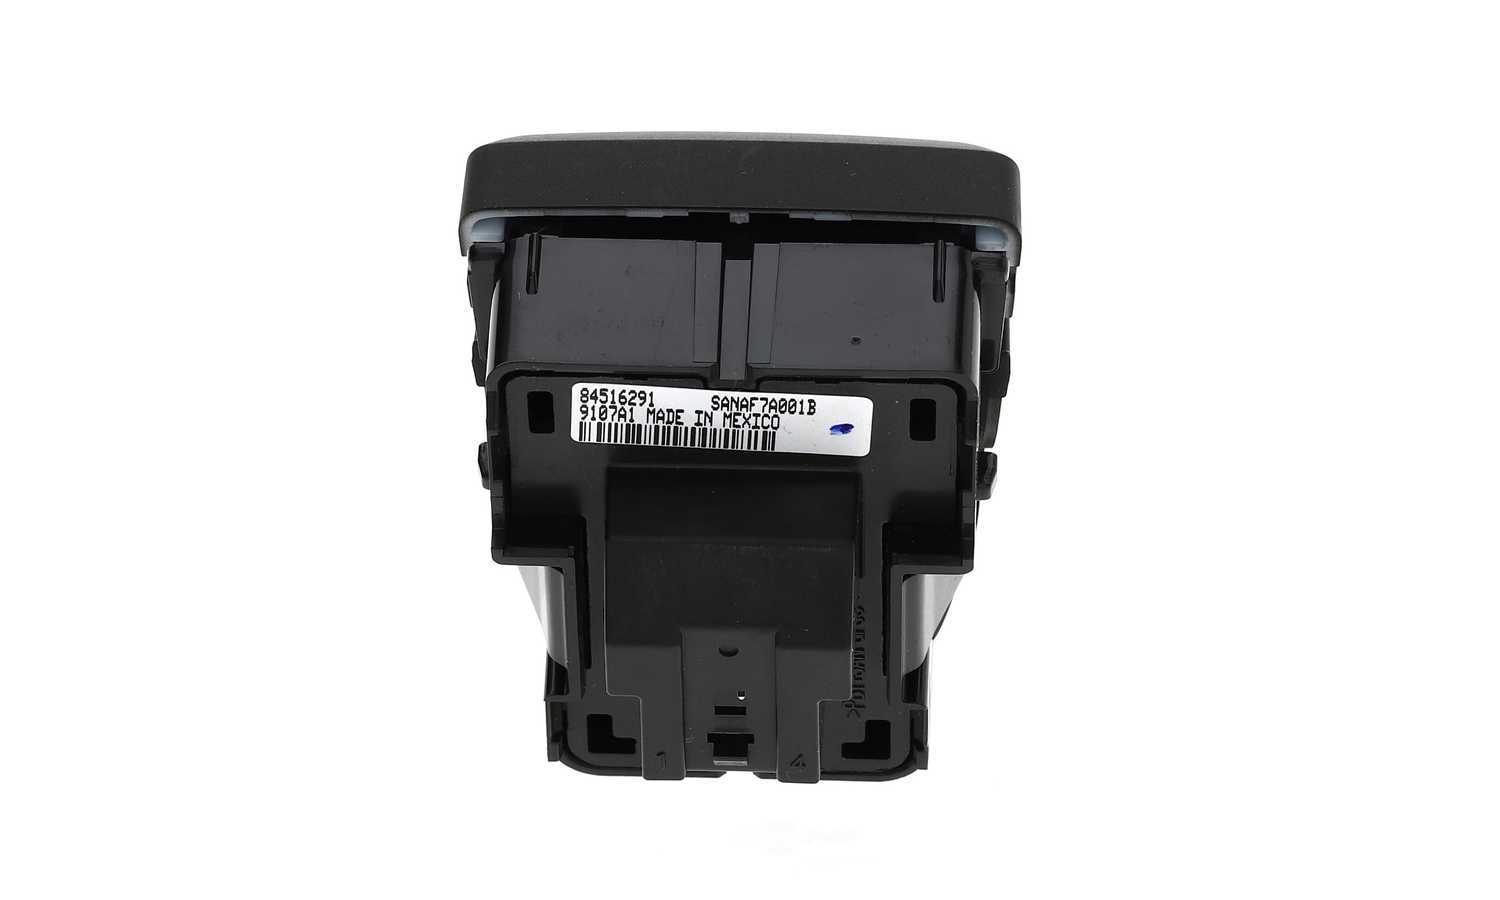 GM GENUINE PARTS - Stability Control Switch - GMP 84516291